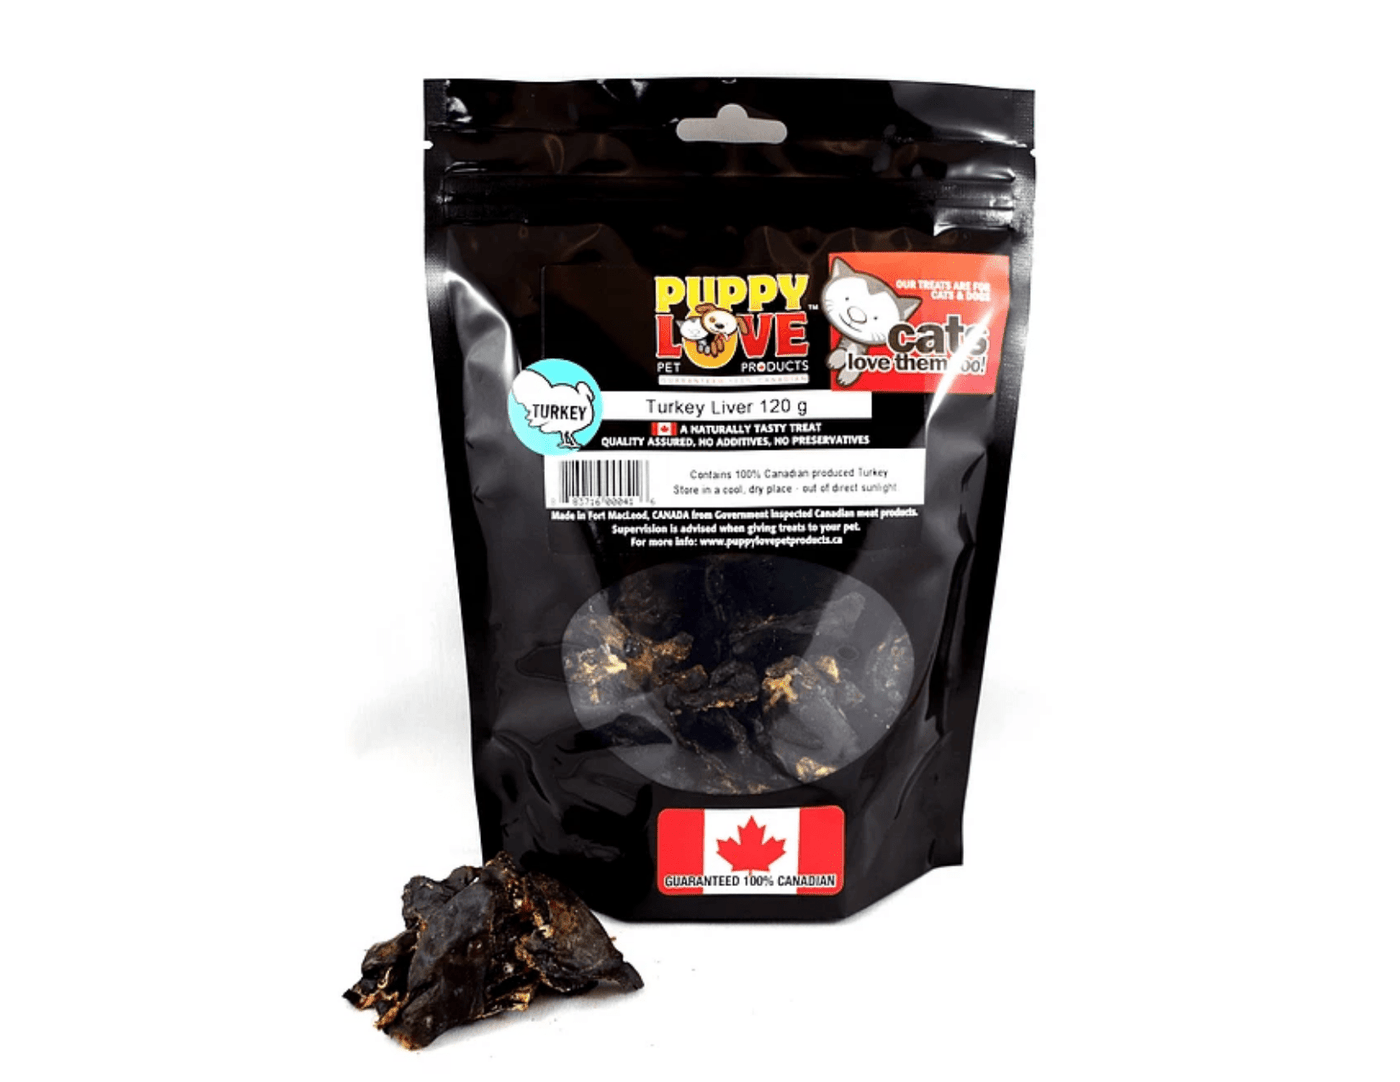 Puppy Love - Turkey Liver 120g/4.2 oz.  for Cats and Dogs